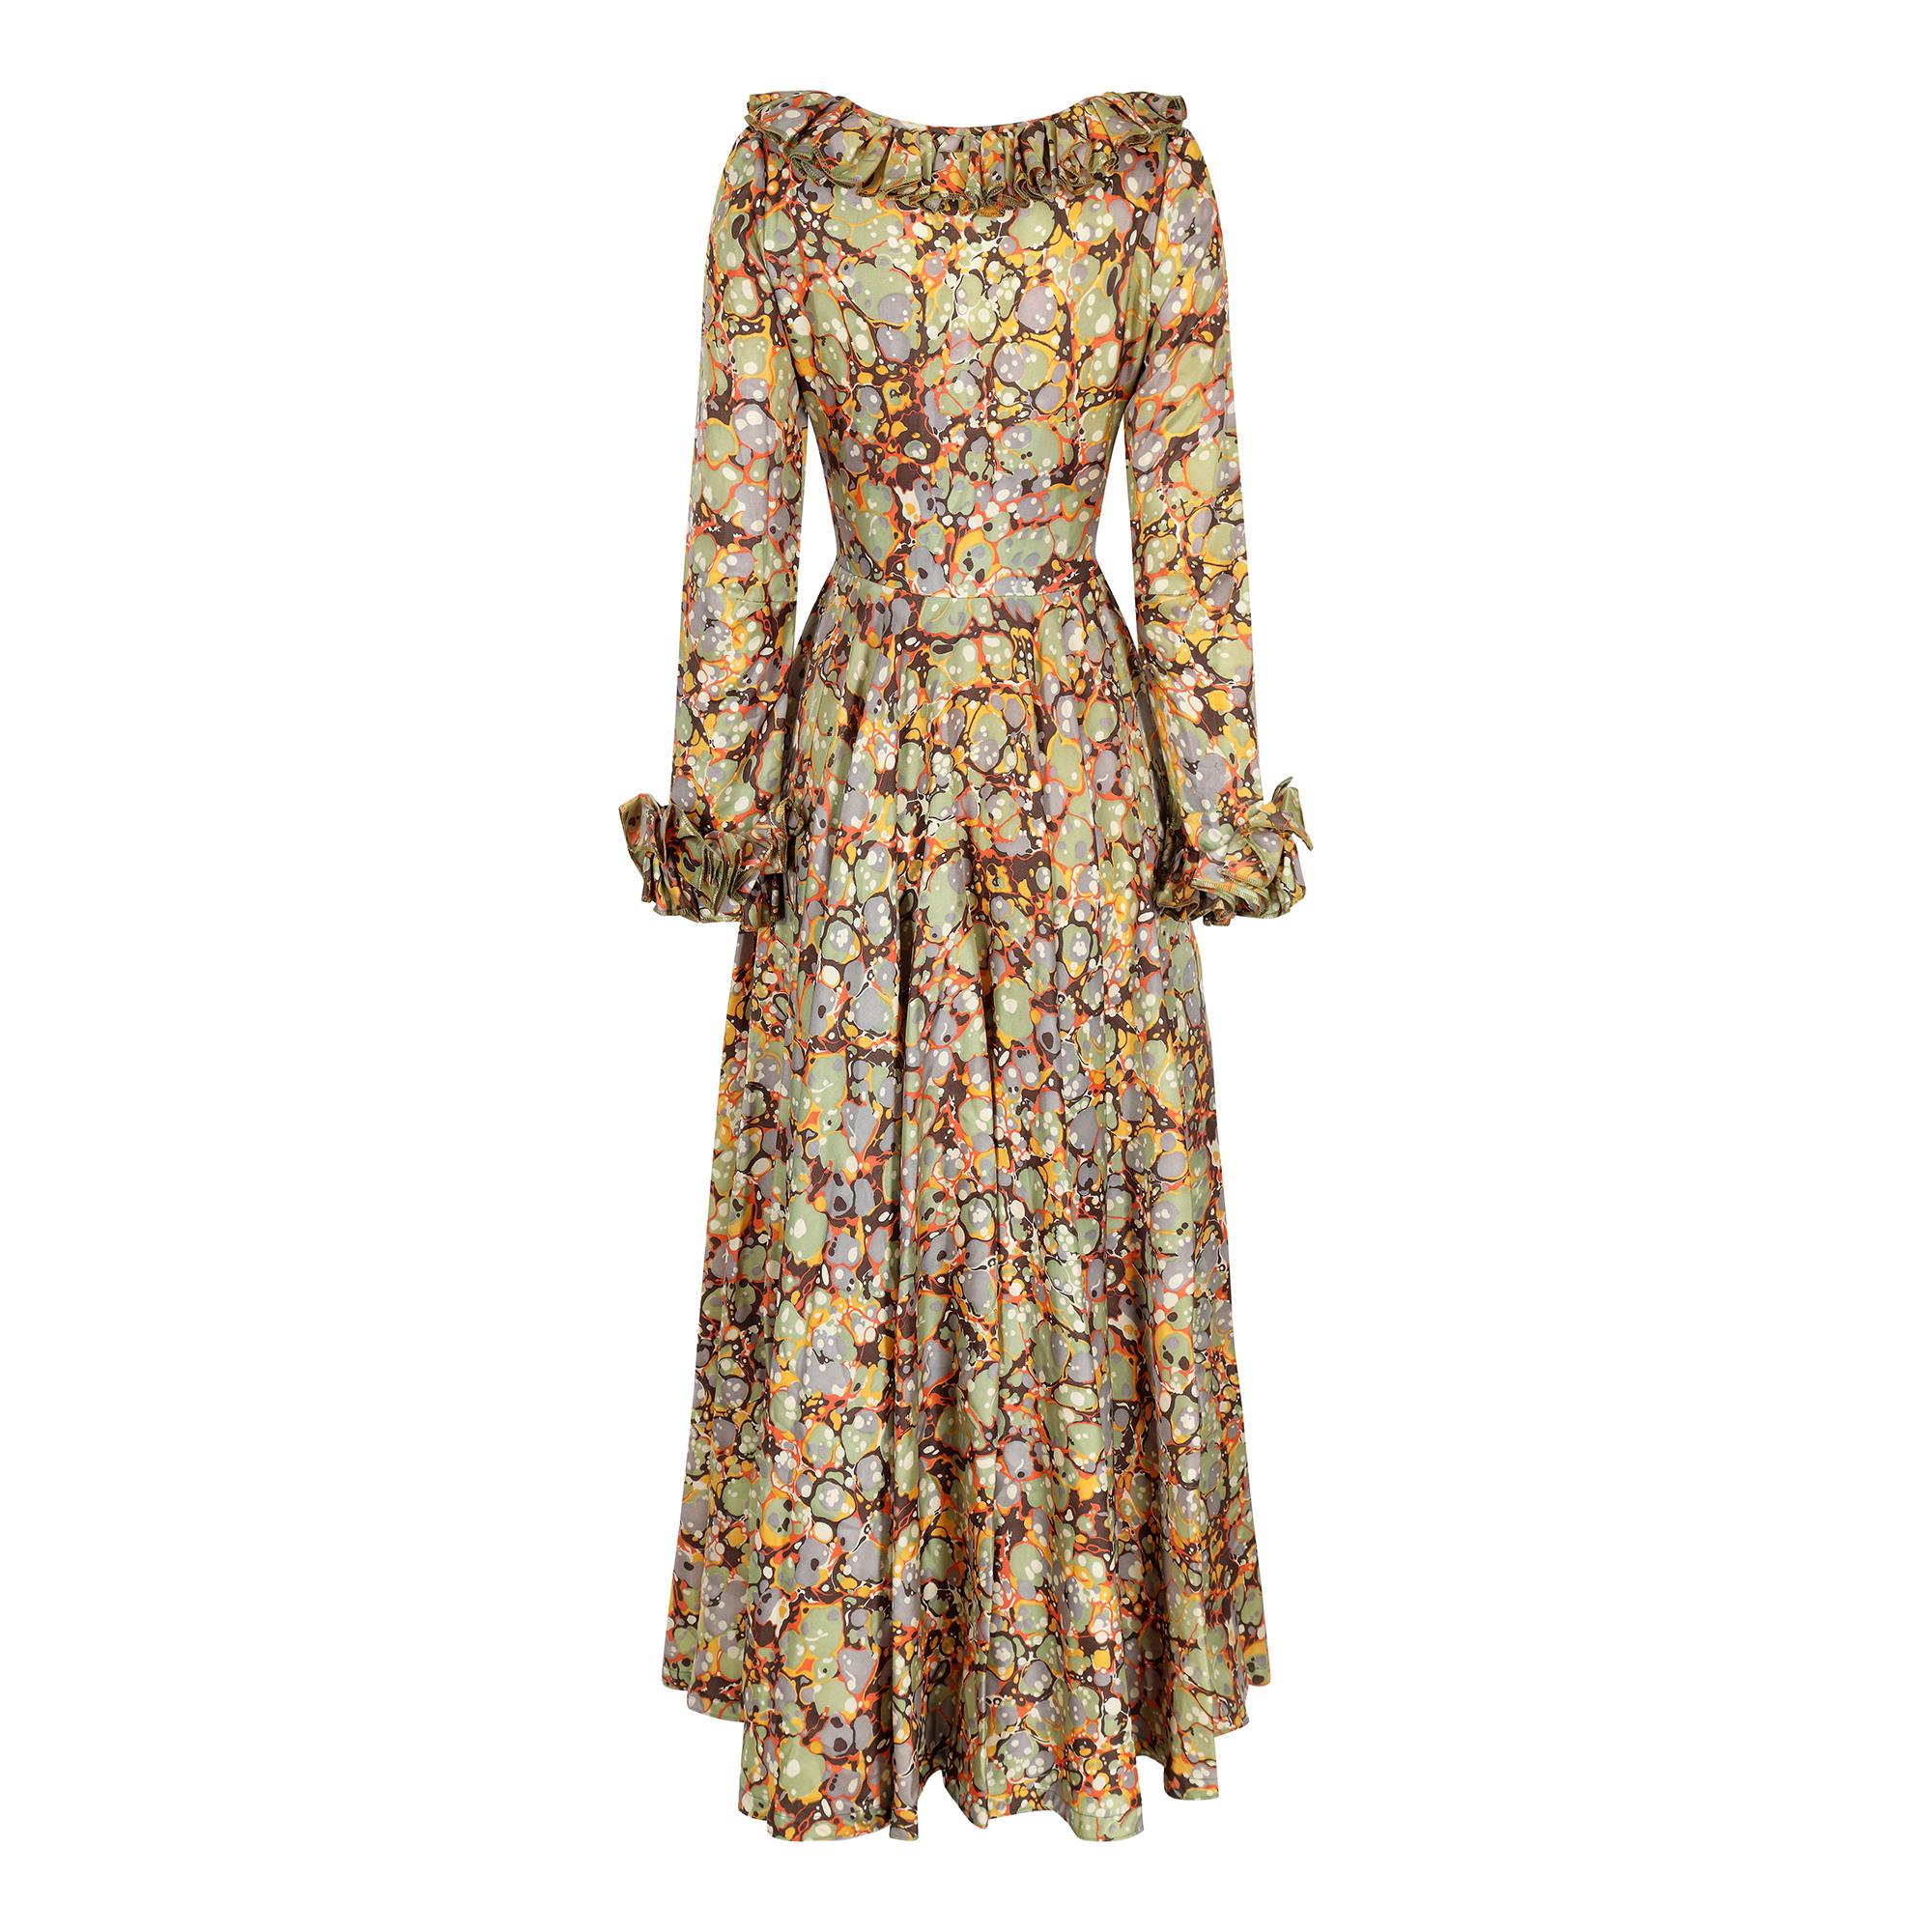 Documented 1970s Jean Varon Psychedelic Bubble Print Maxi Dress at 1stDibs